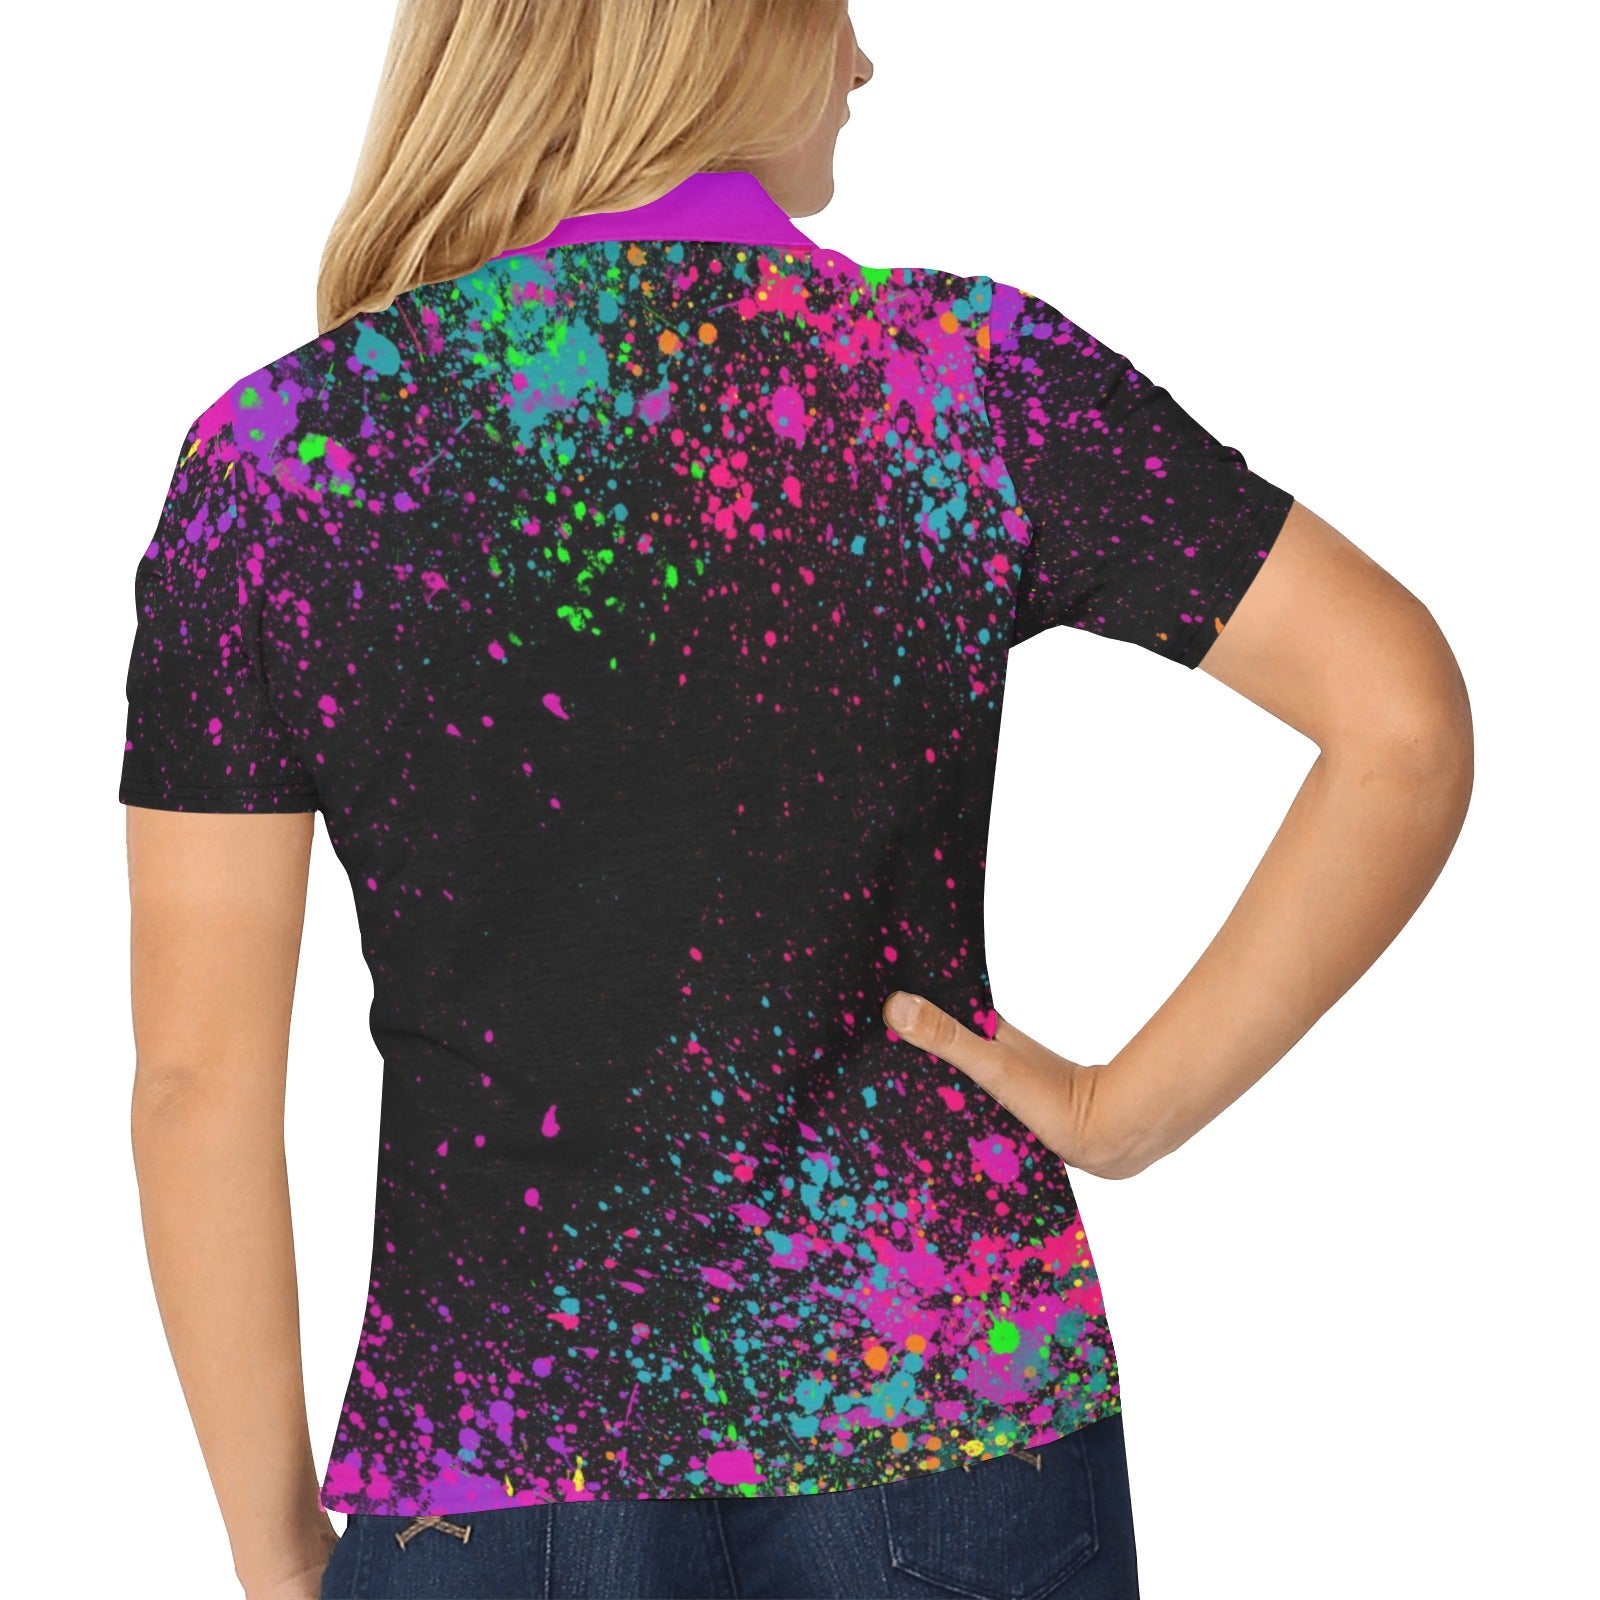 Balloon Twisting Polo Shirt with colourful paint splatter design